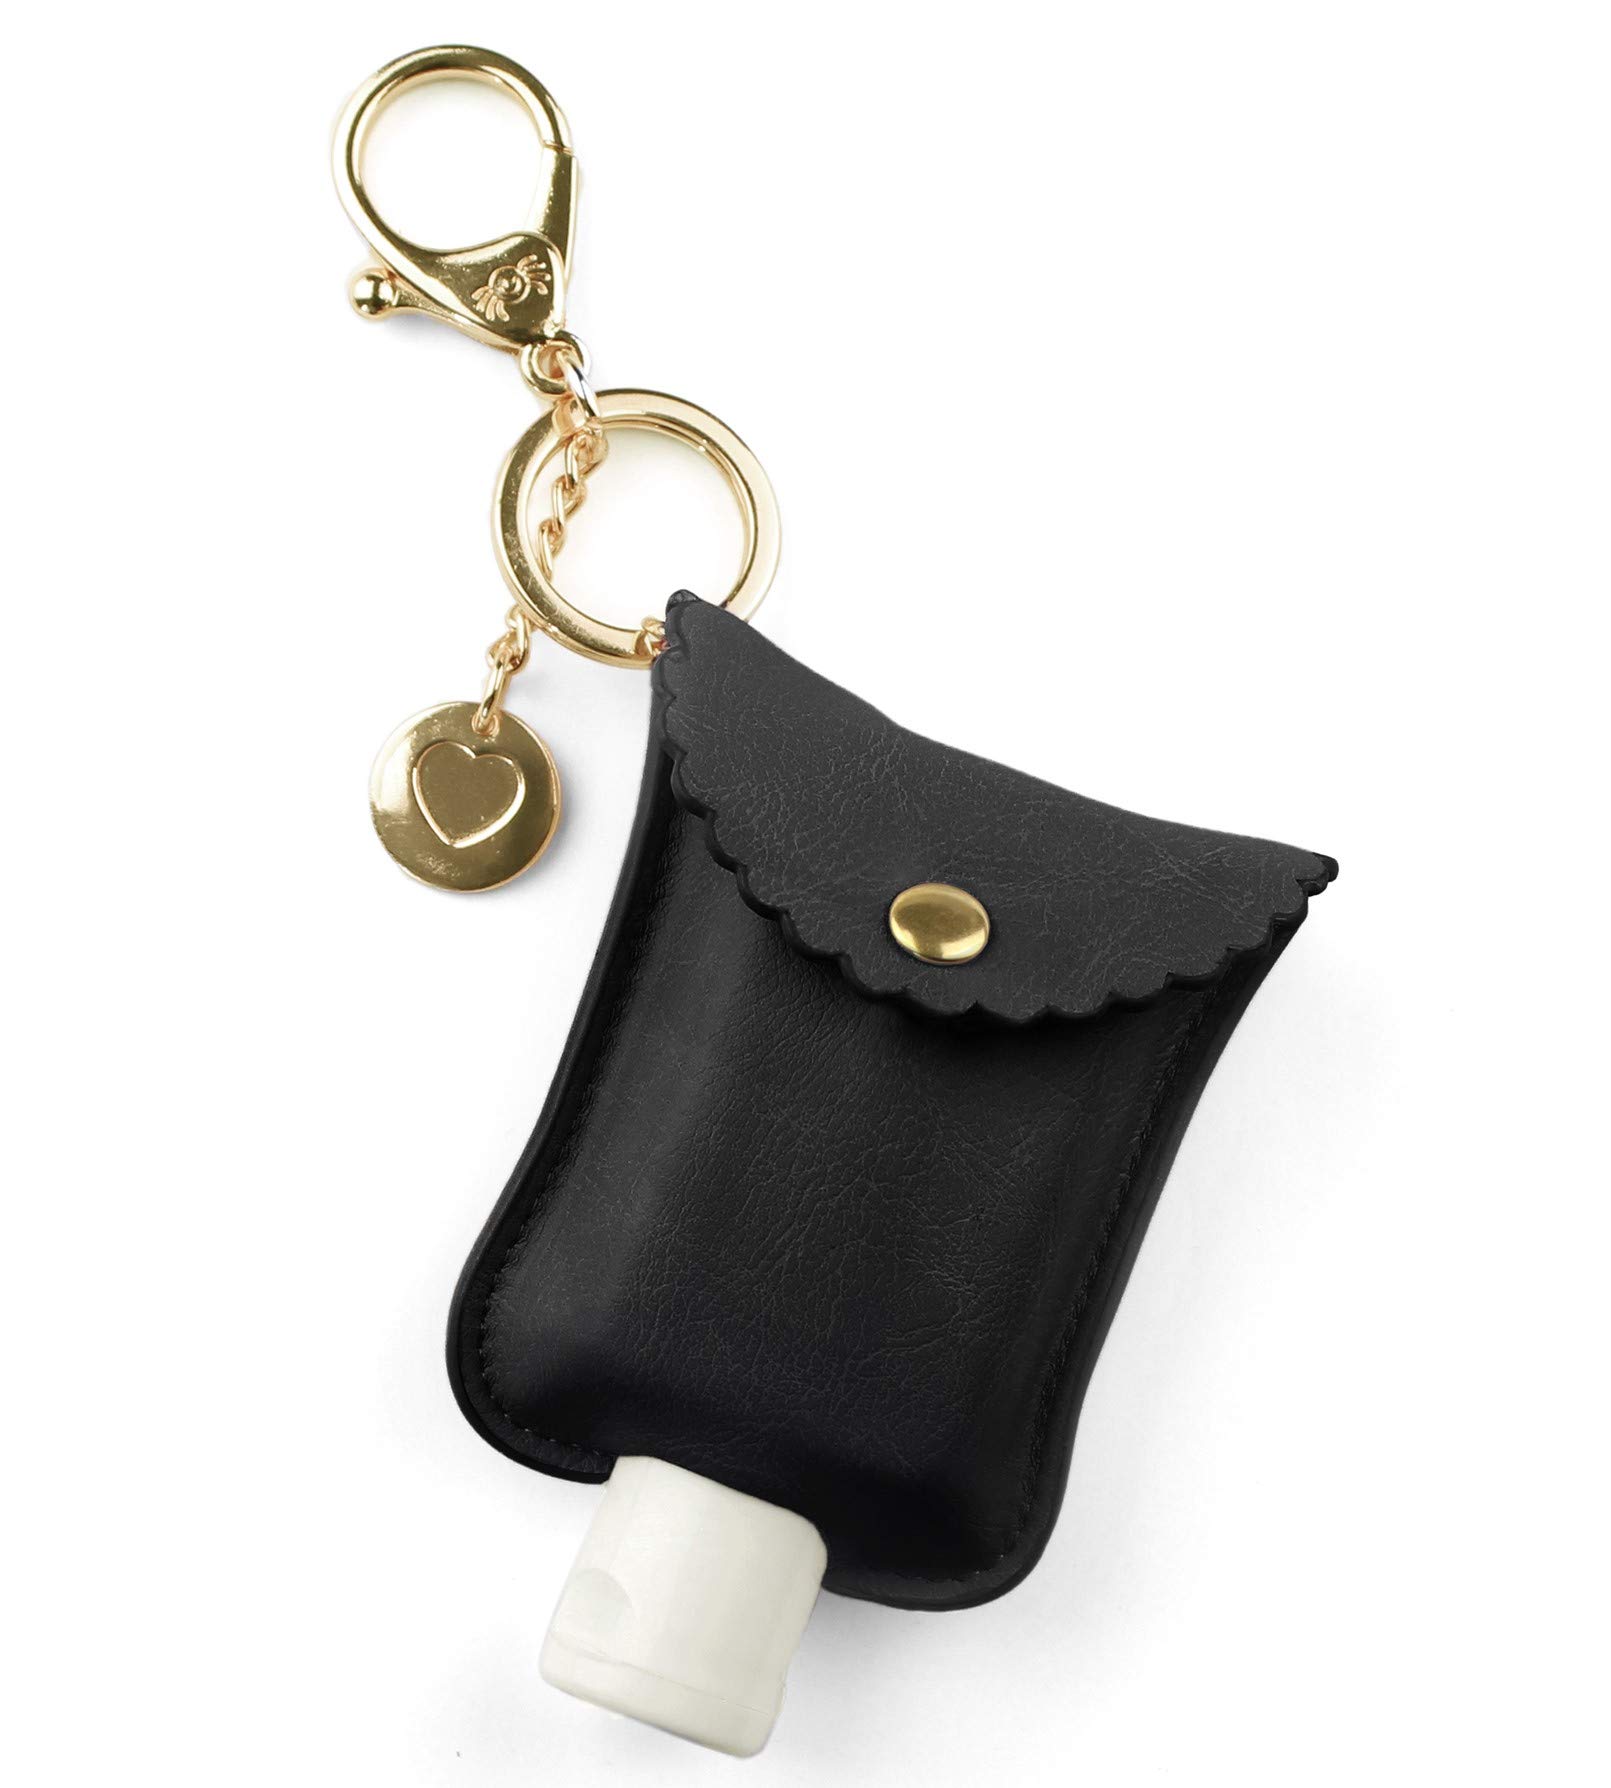 Itzy Ritzy Hand Sanitizer Holder; Fits 2-Ounce Bottles of Hand Sanitizer (Not Included); Clips to Diaper Bag, Purse or Travel Bag, Black